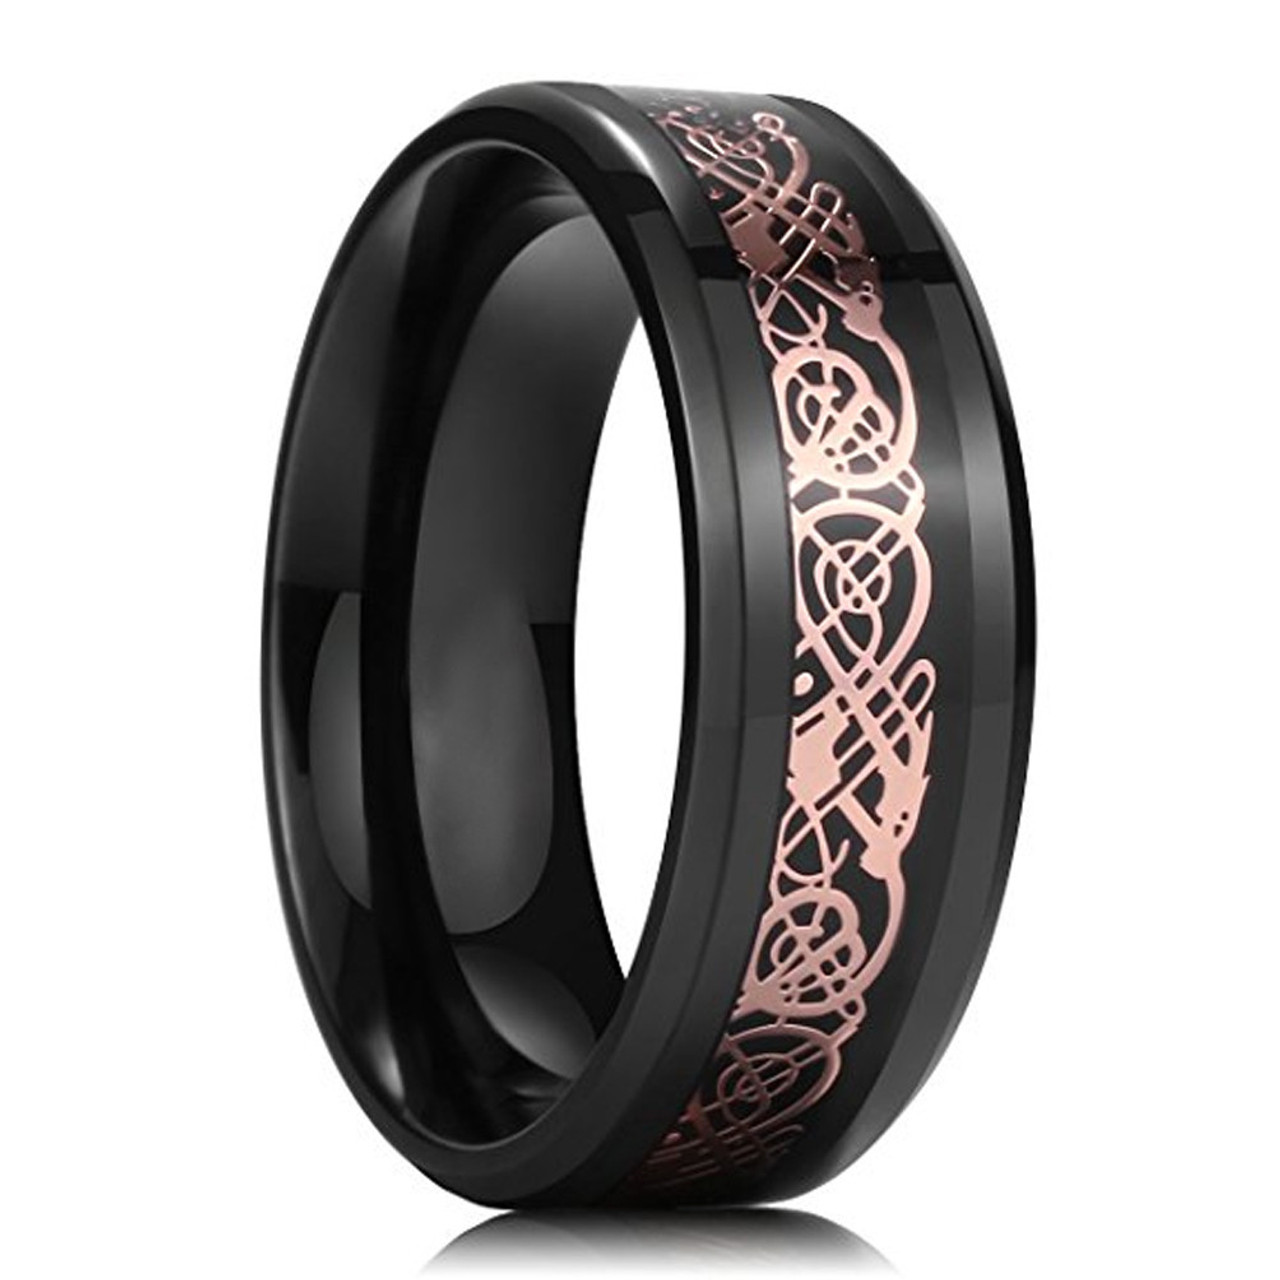 Men's Tungsten Wedding Band (8mm). Celtic Wedding Band Black with Rose Gold Celtic Knot Inlay - Tungsten Carbide Ring